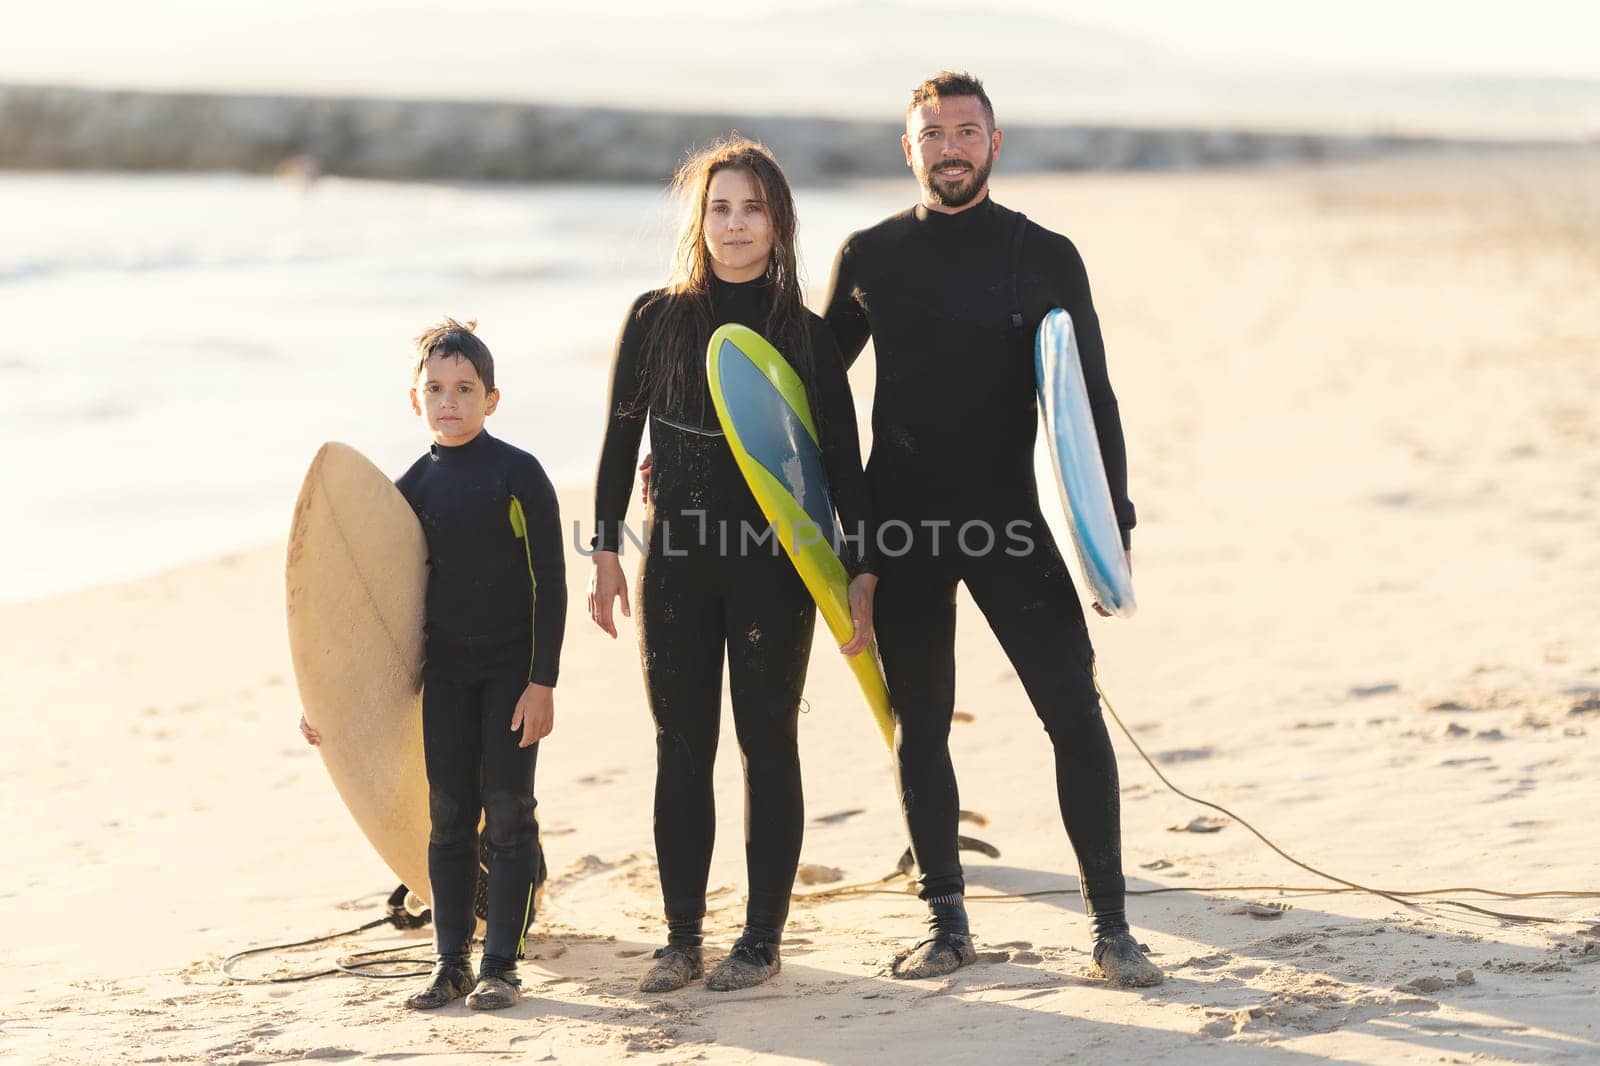 A family of surfers in wetsuits standing on the seashore holding surfboards. Mid shot